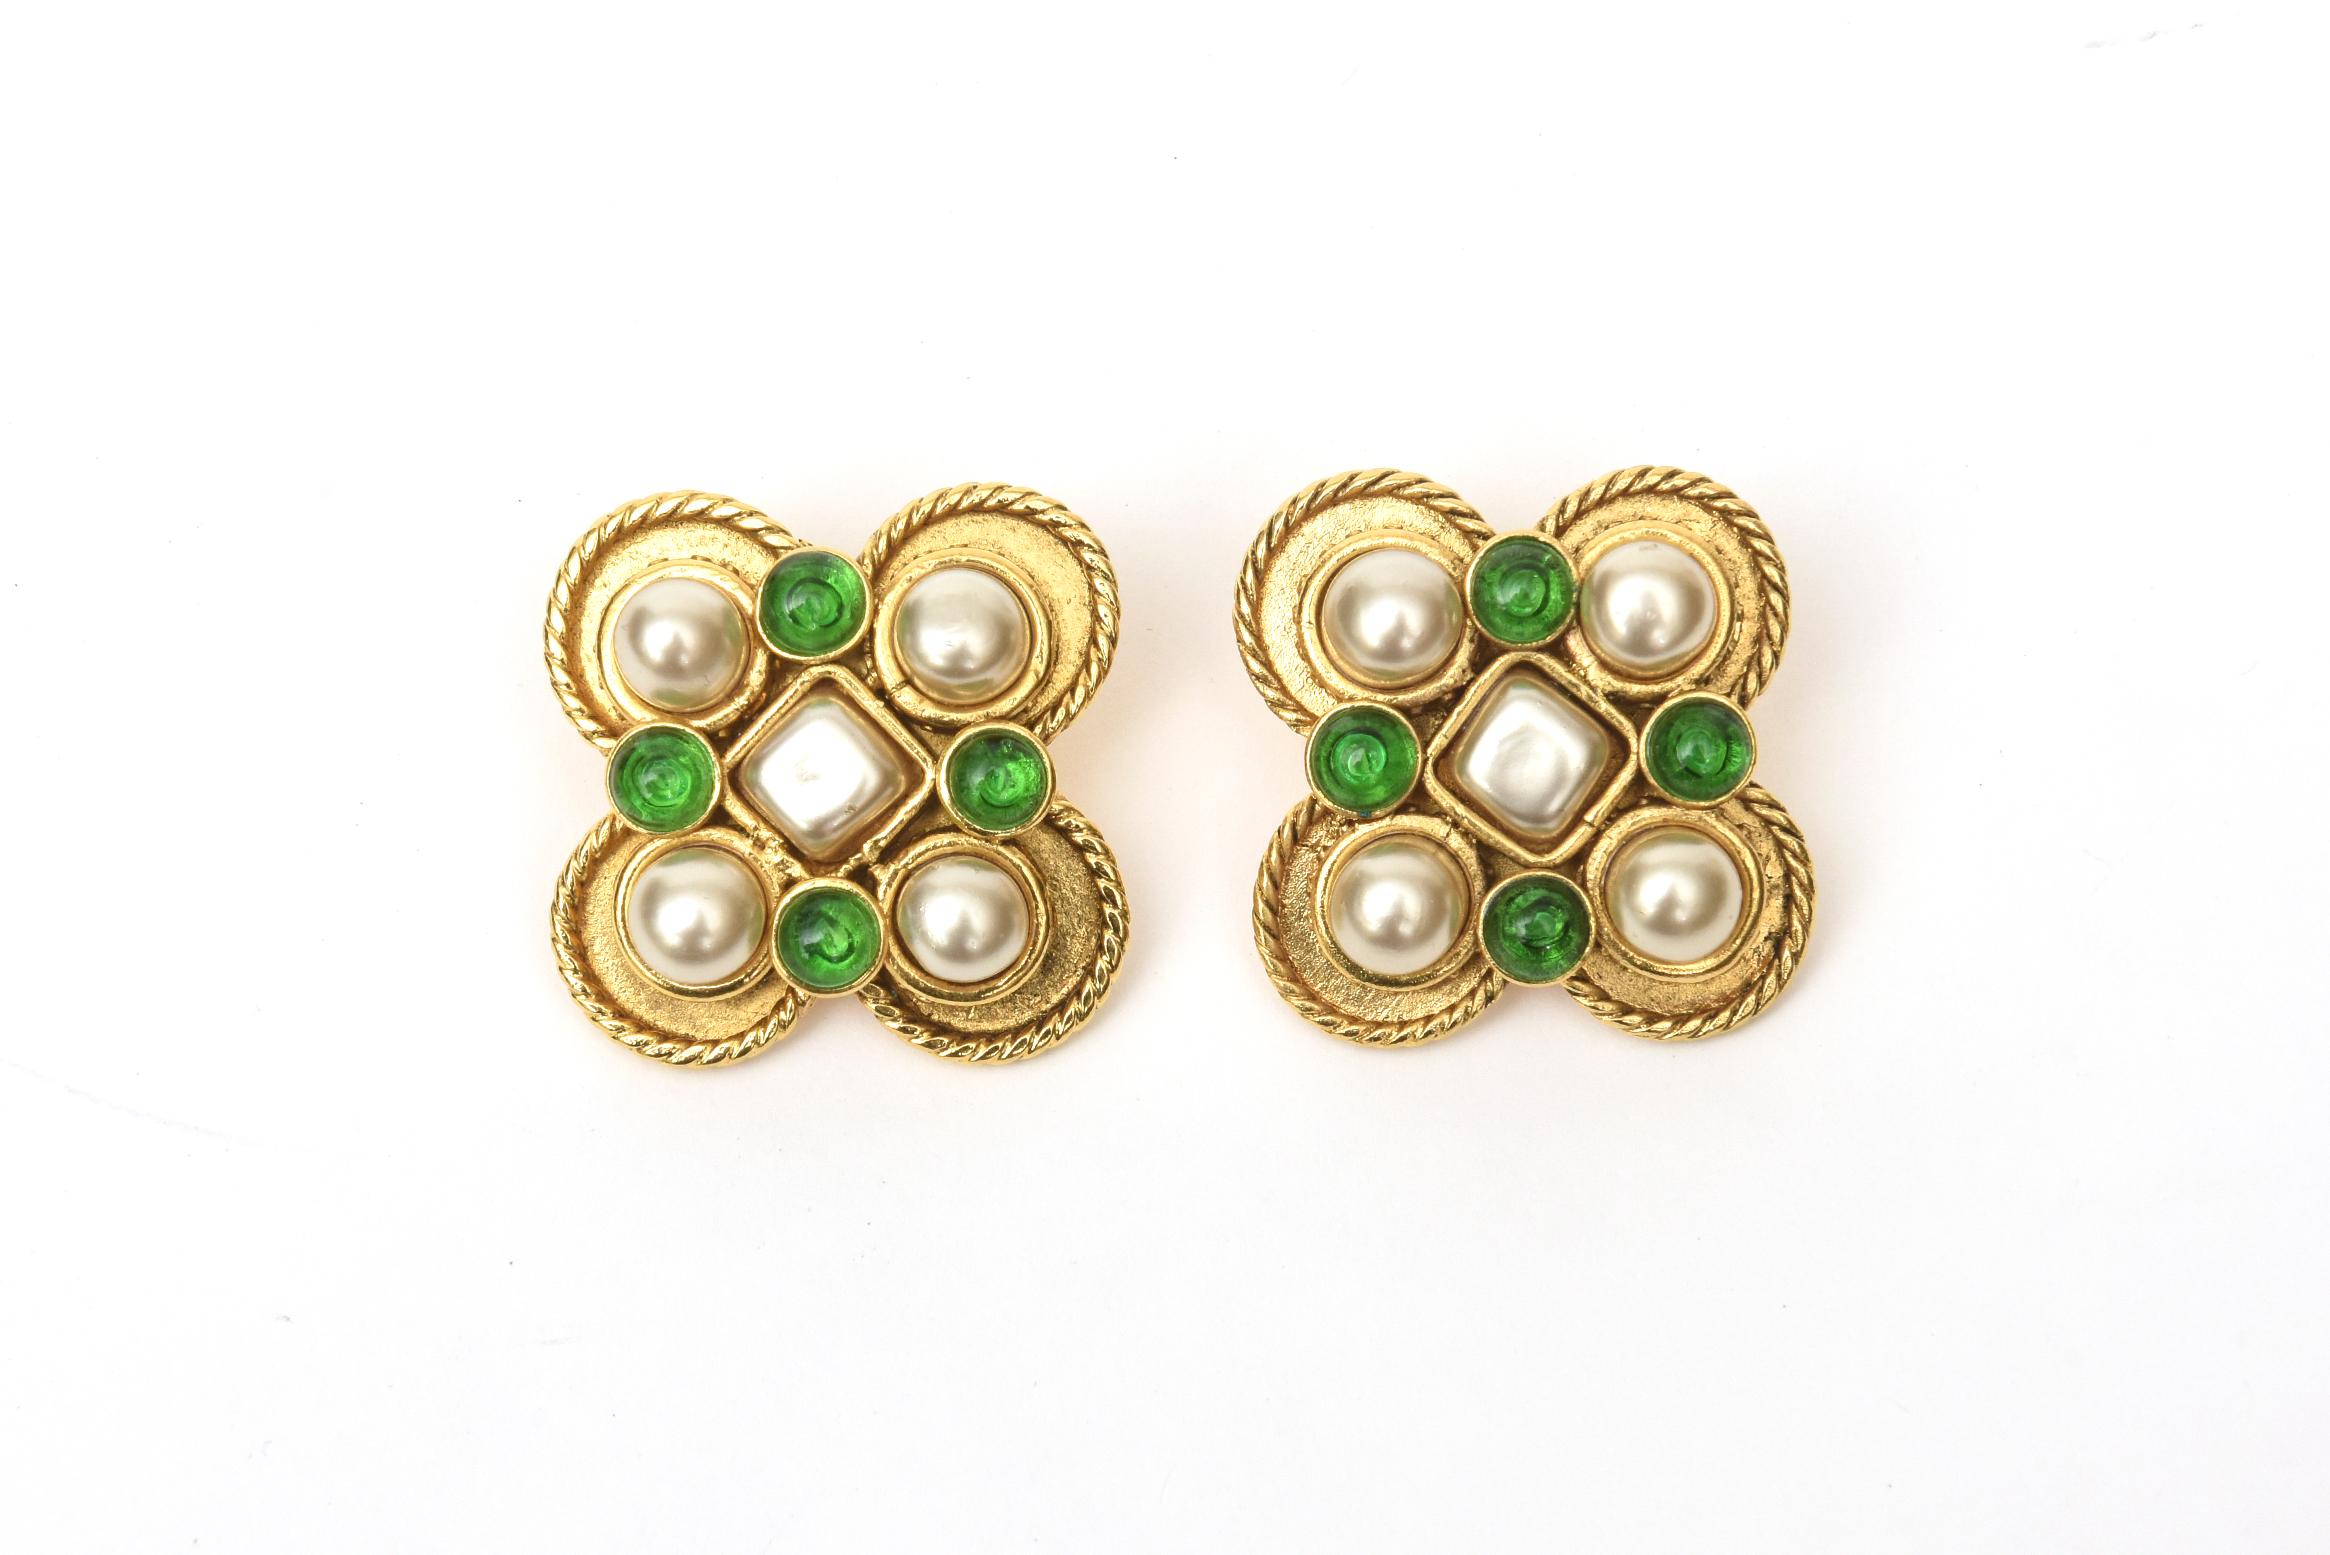 These stunning pair of Chanel Gripoix green glass and faux pearl clip on earrings are from the 90's. They have a stately look on the ear lobe. The twisted gold metal in rope design accents the colors and materials. These can go day to evening and